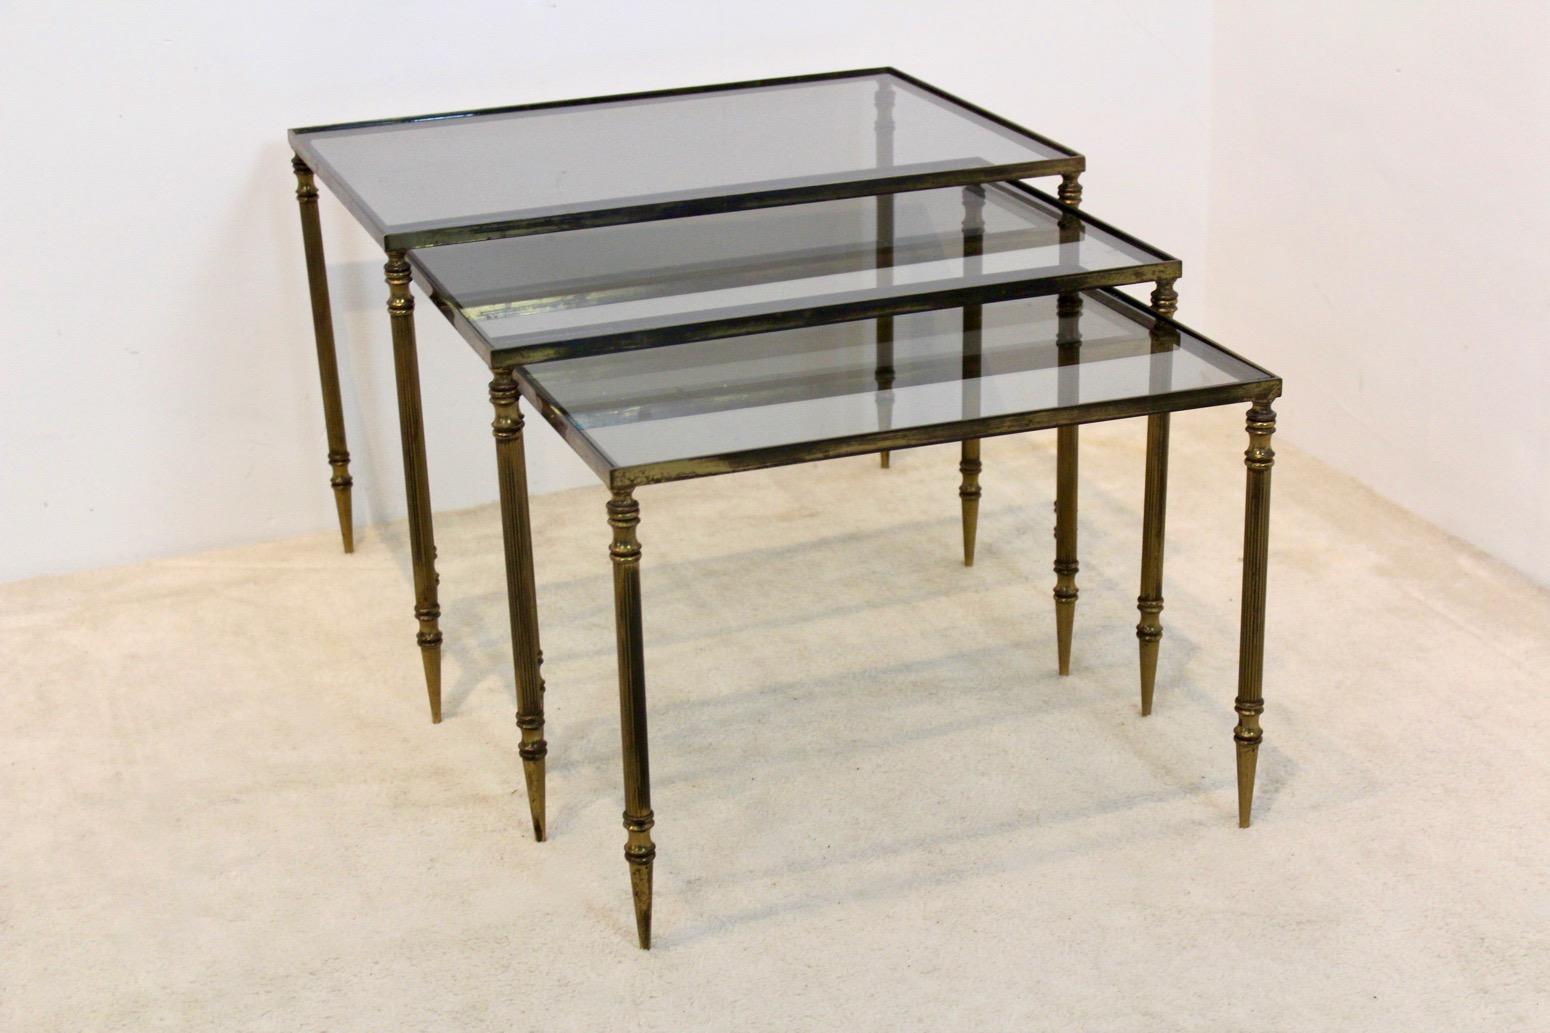 This gorgeous and elegant nest of three tables originates from France and was manufactured in the ‘70’s by Maison Charles. They feature a brass frame with dark glass on top. The brass frame has a nice patina due to age and use. A beautiful set of